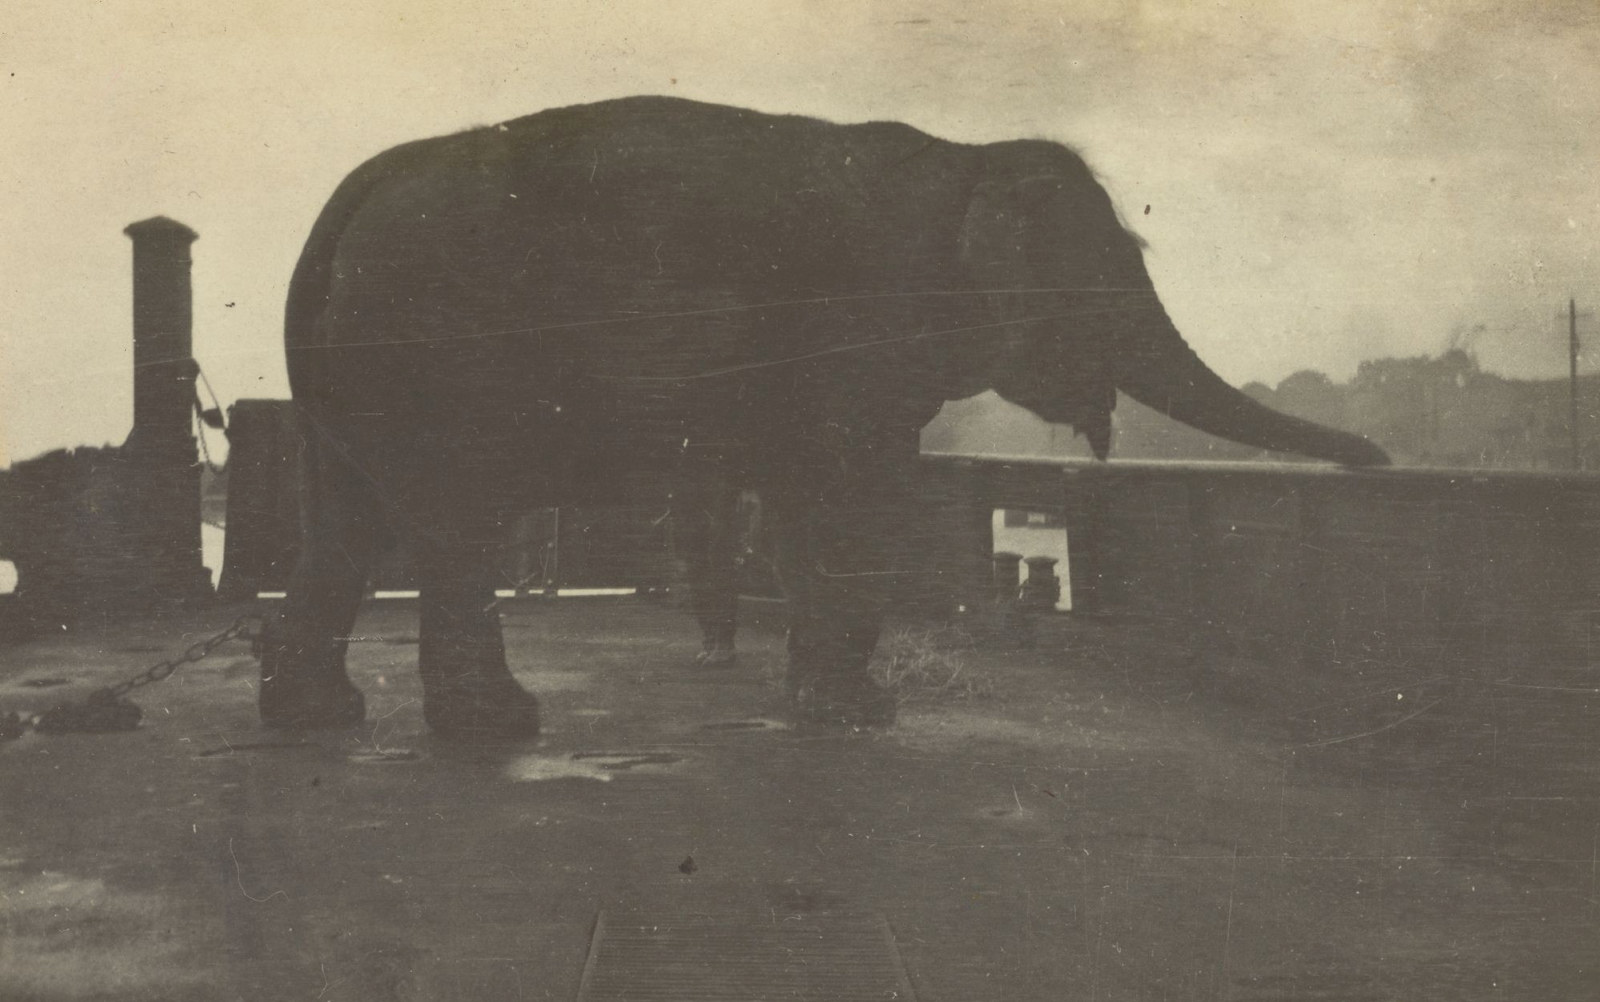 Photograph of Jessie the elephant on the vehicle ferry Kedumba in 1916